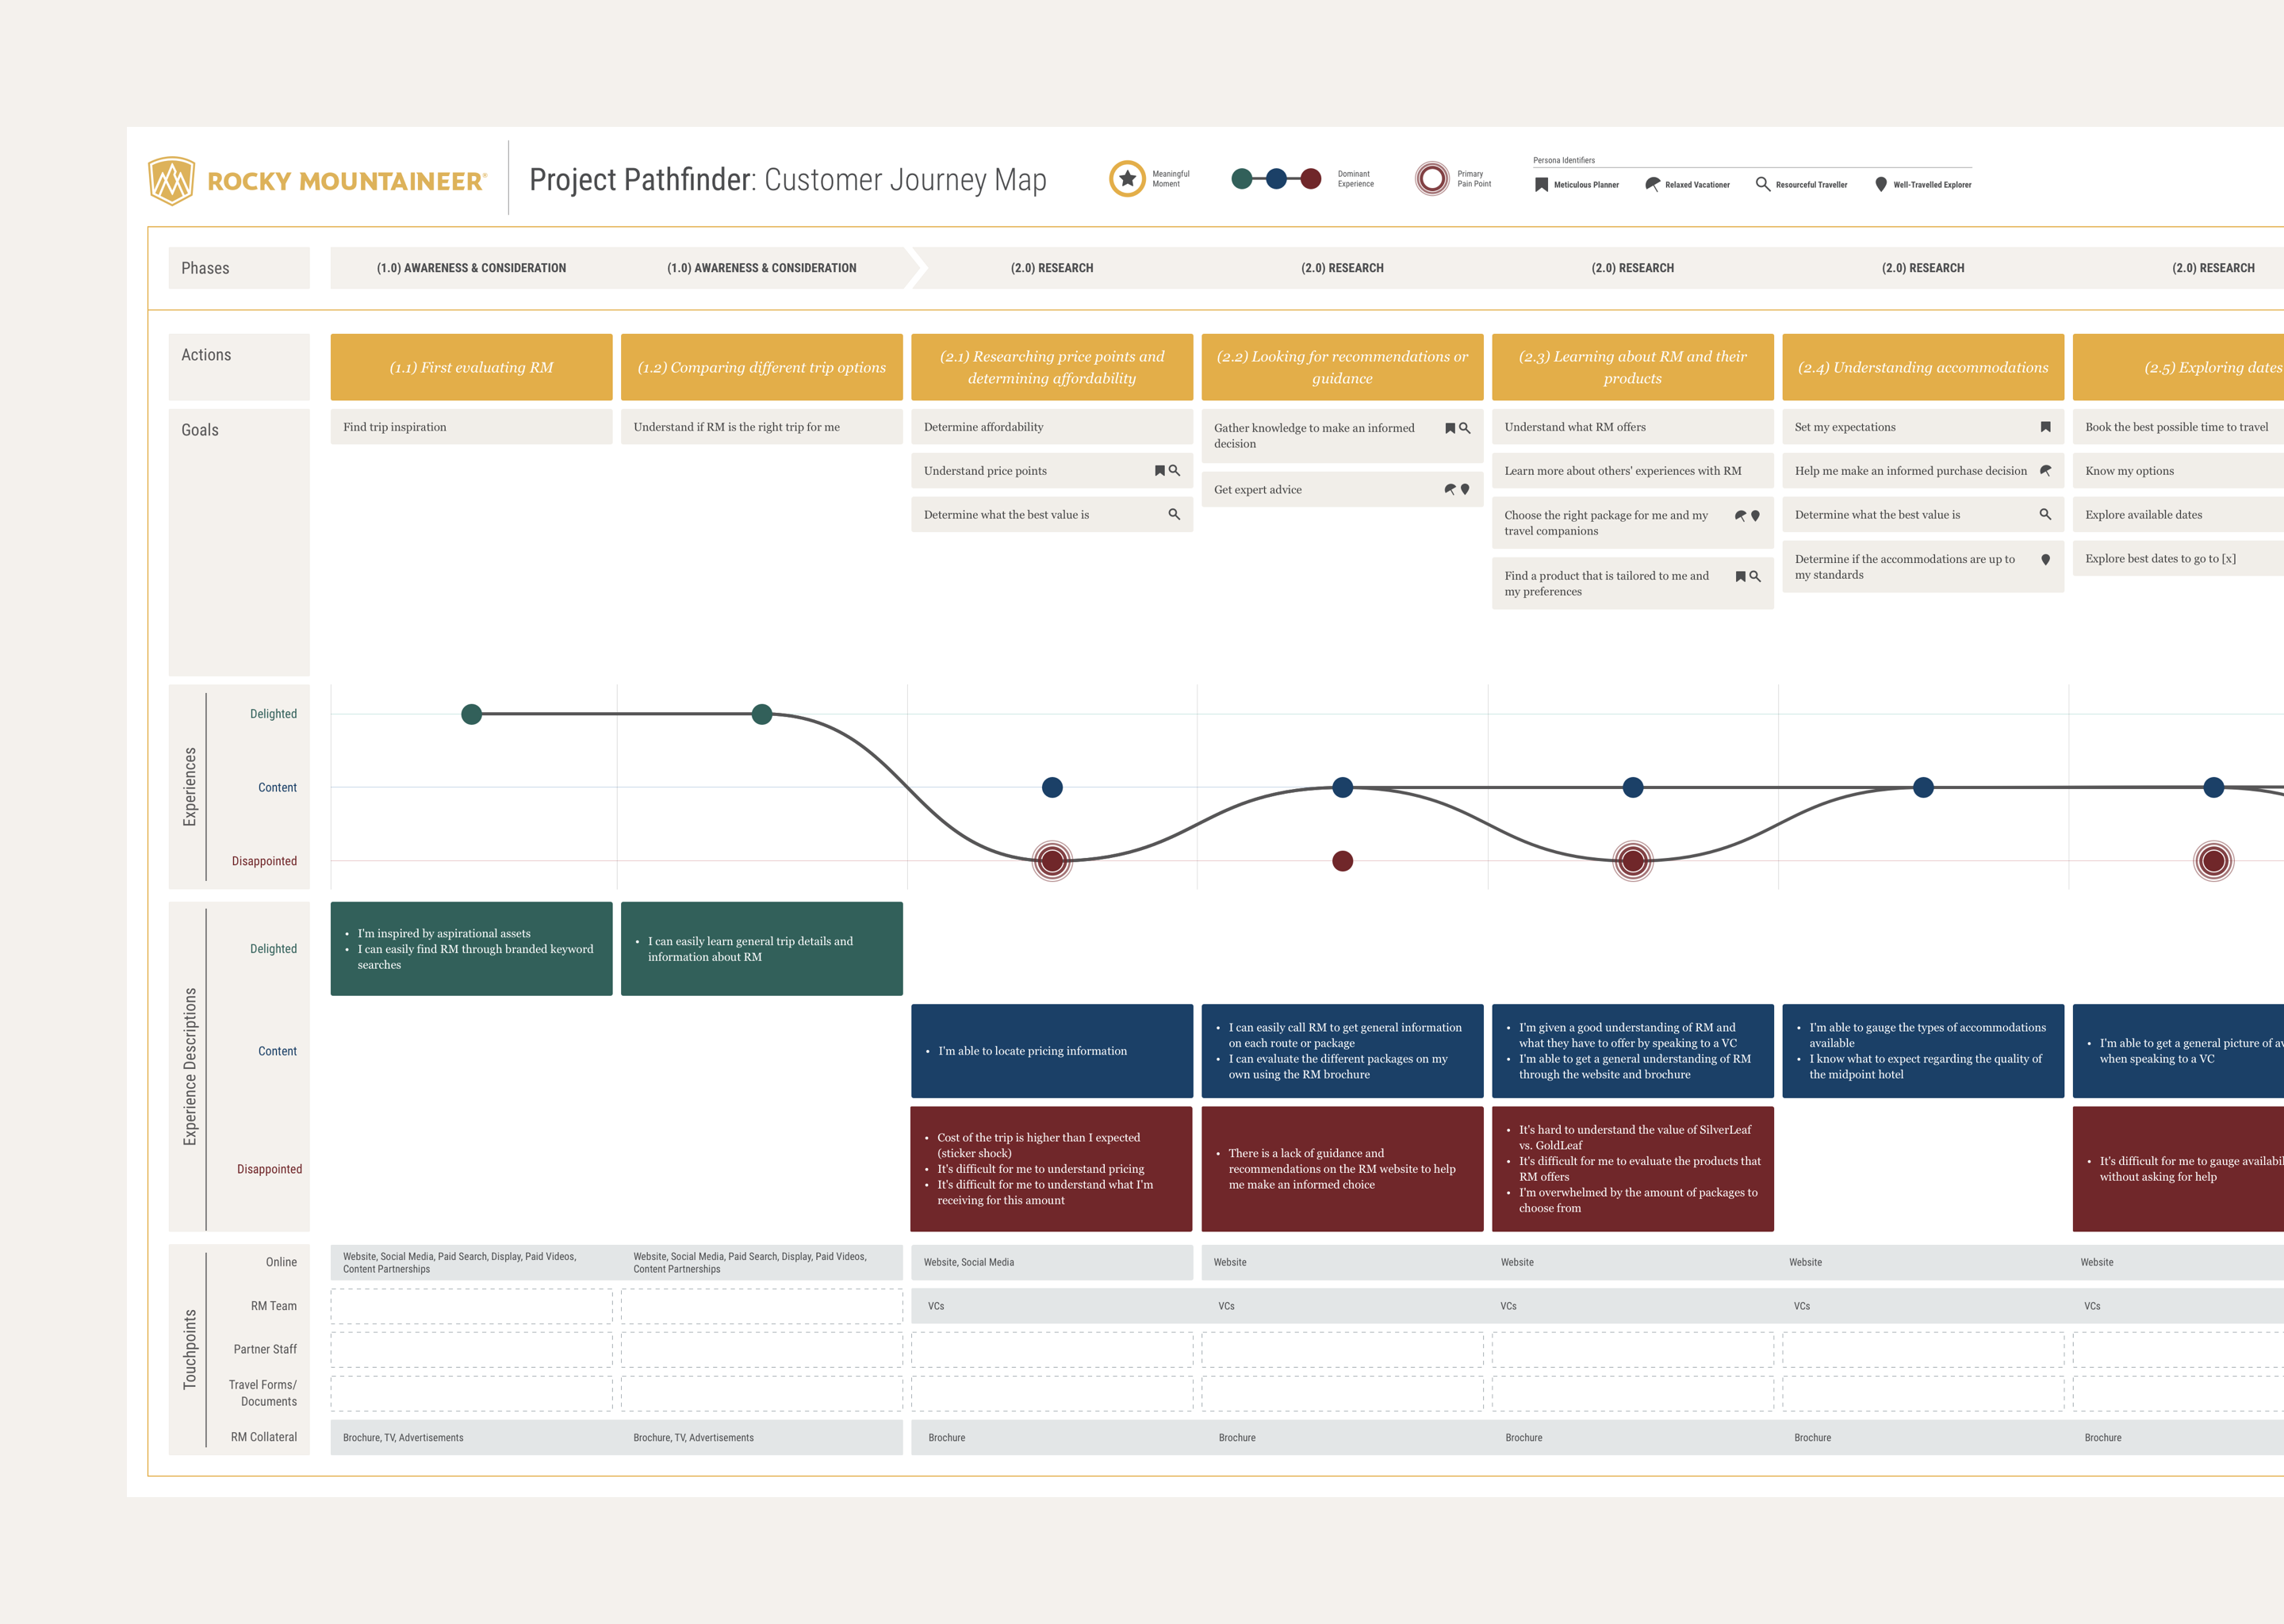 One of many versions of the Rocky Mountaineer Customer Journey Map